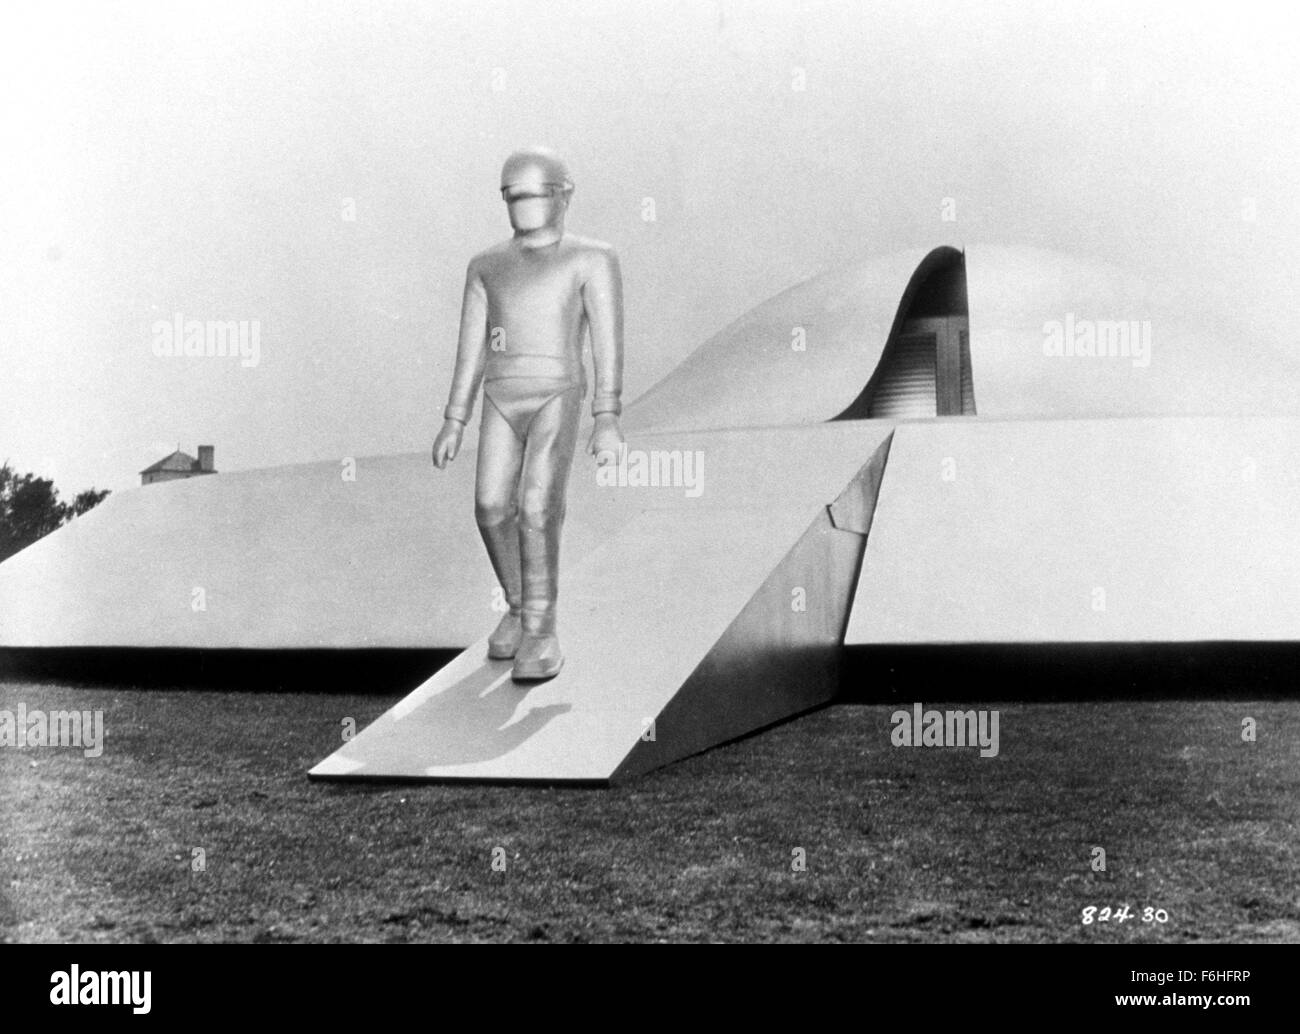 1951, Film Title: DAY THE EARTH STOOD STILL, Director: ROBERT WISE, Studio: FOX, Pictured: 1951, ALIENS (GOOD), ROBOTS-ANDROIDS-CYBORGS-CLONES, SCI-FI, VESSEL, WOMB LIKE, UFO, SPACE SHIP, ROBOT, ARRIVING. (Credit Image: SNAP) Stock Photo